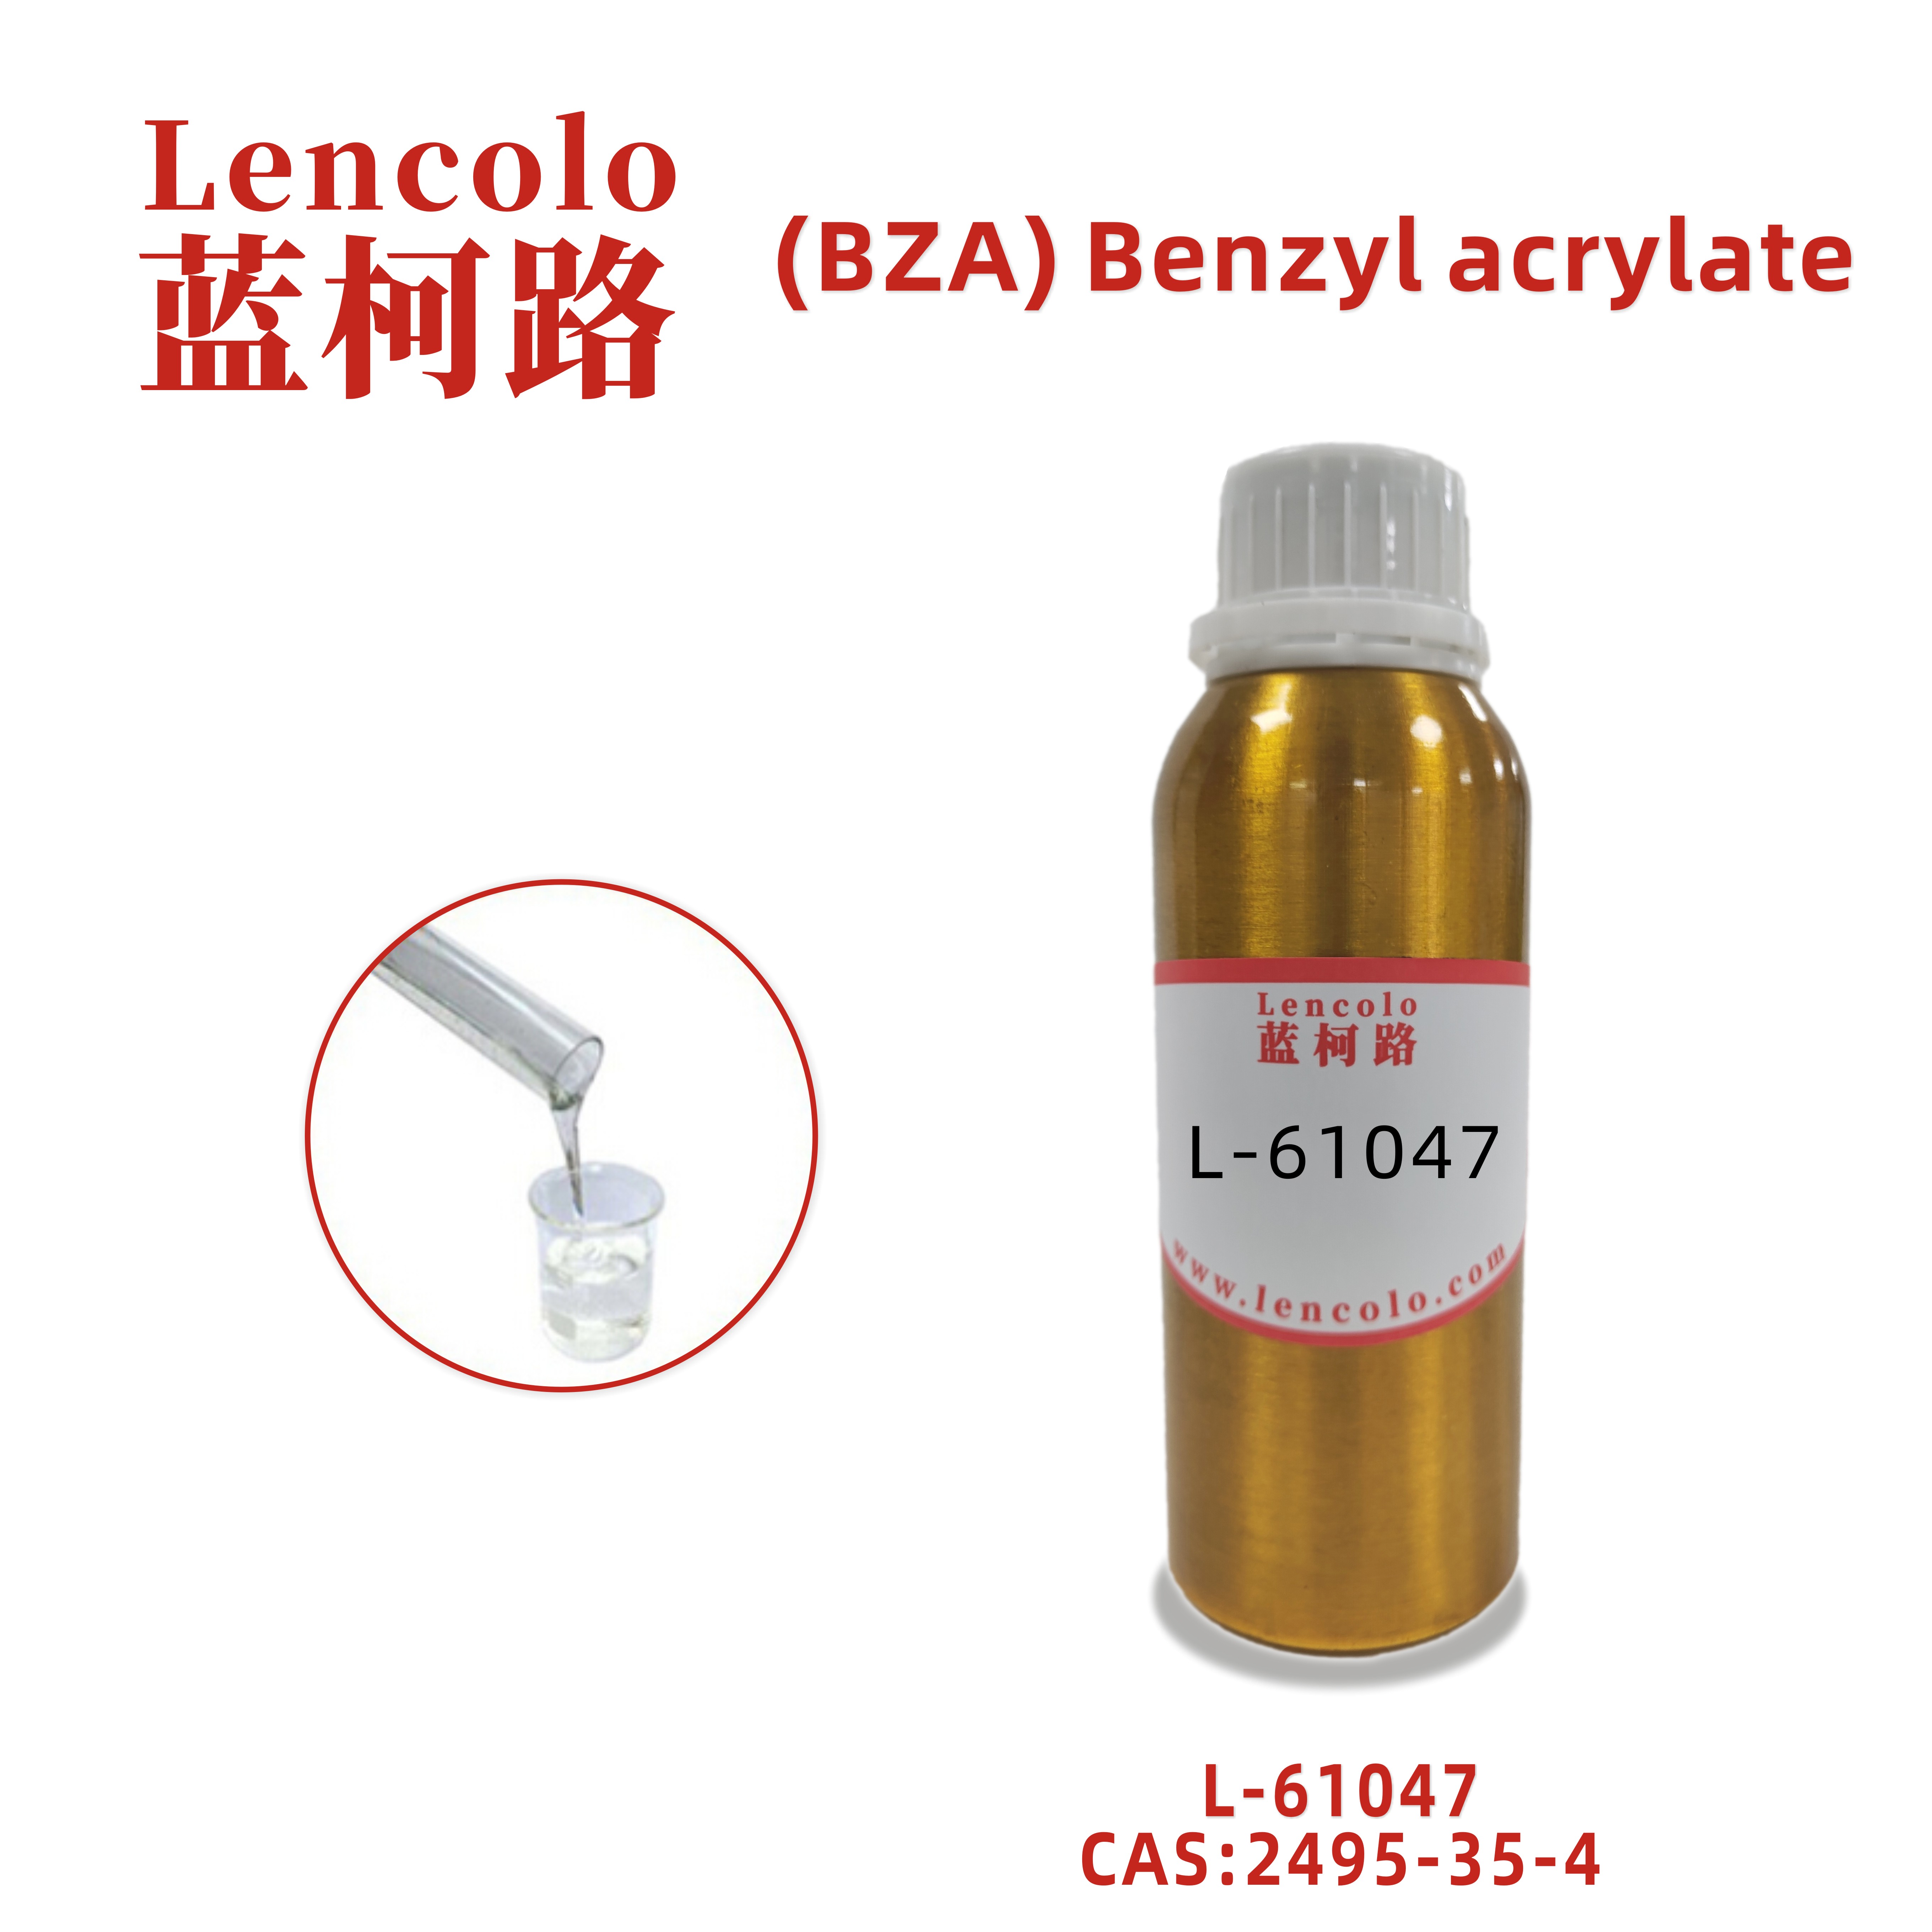 L-61047 (BZA) Benzyl acrylate has excellent wetting, dispersion and stability for aromatic ring pigments CAS 2495-35-4